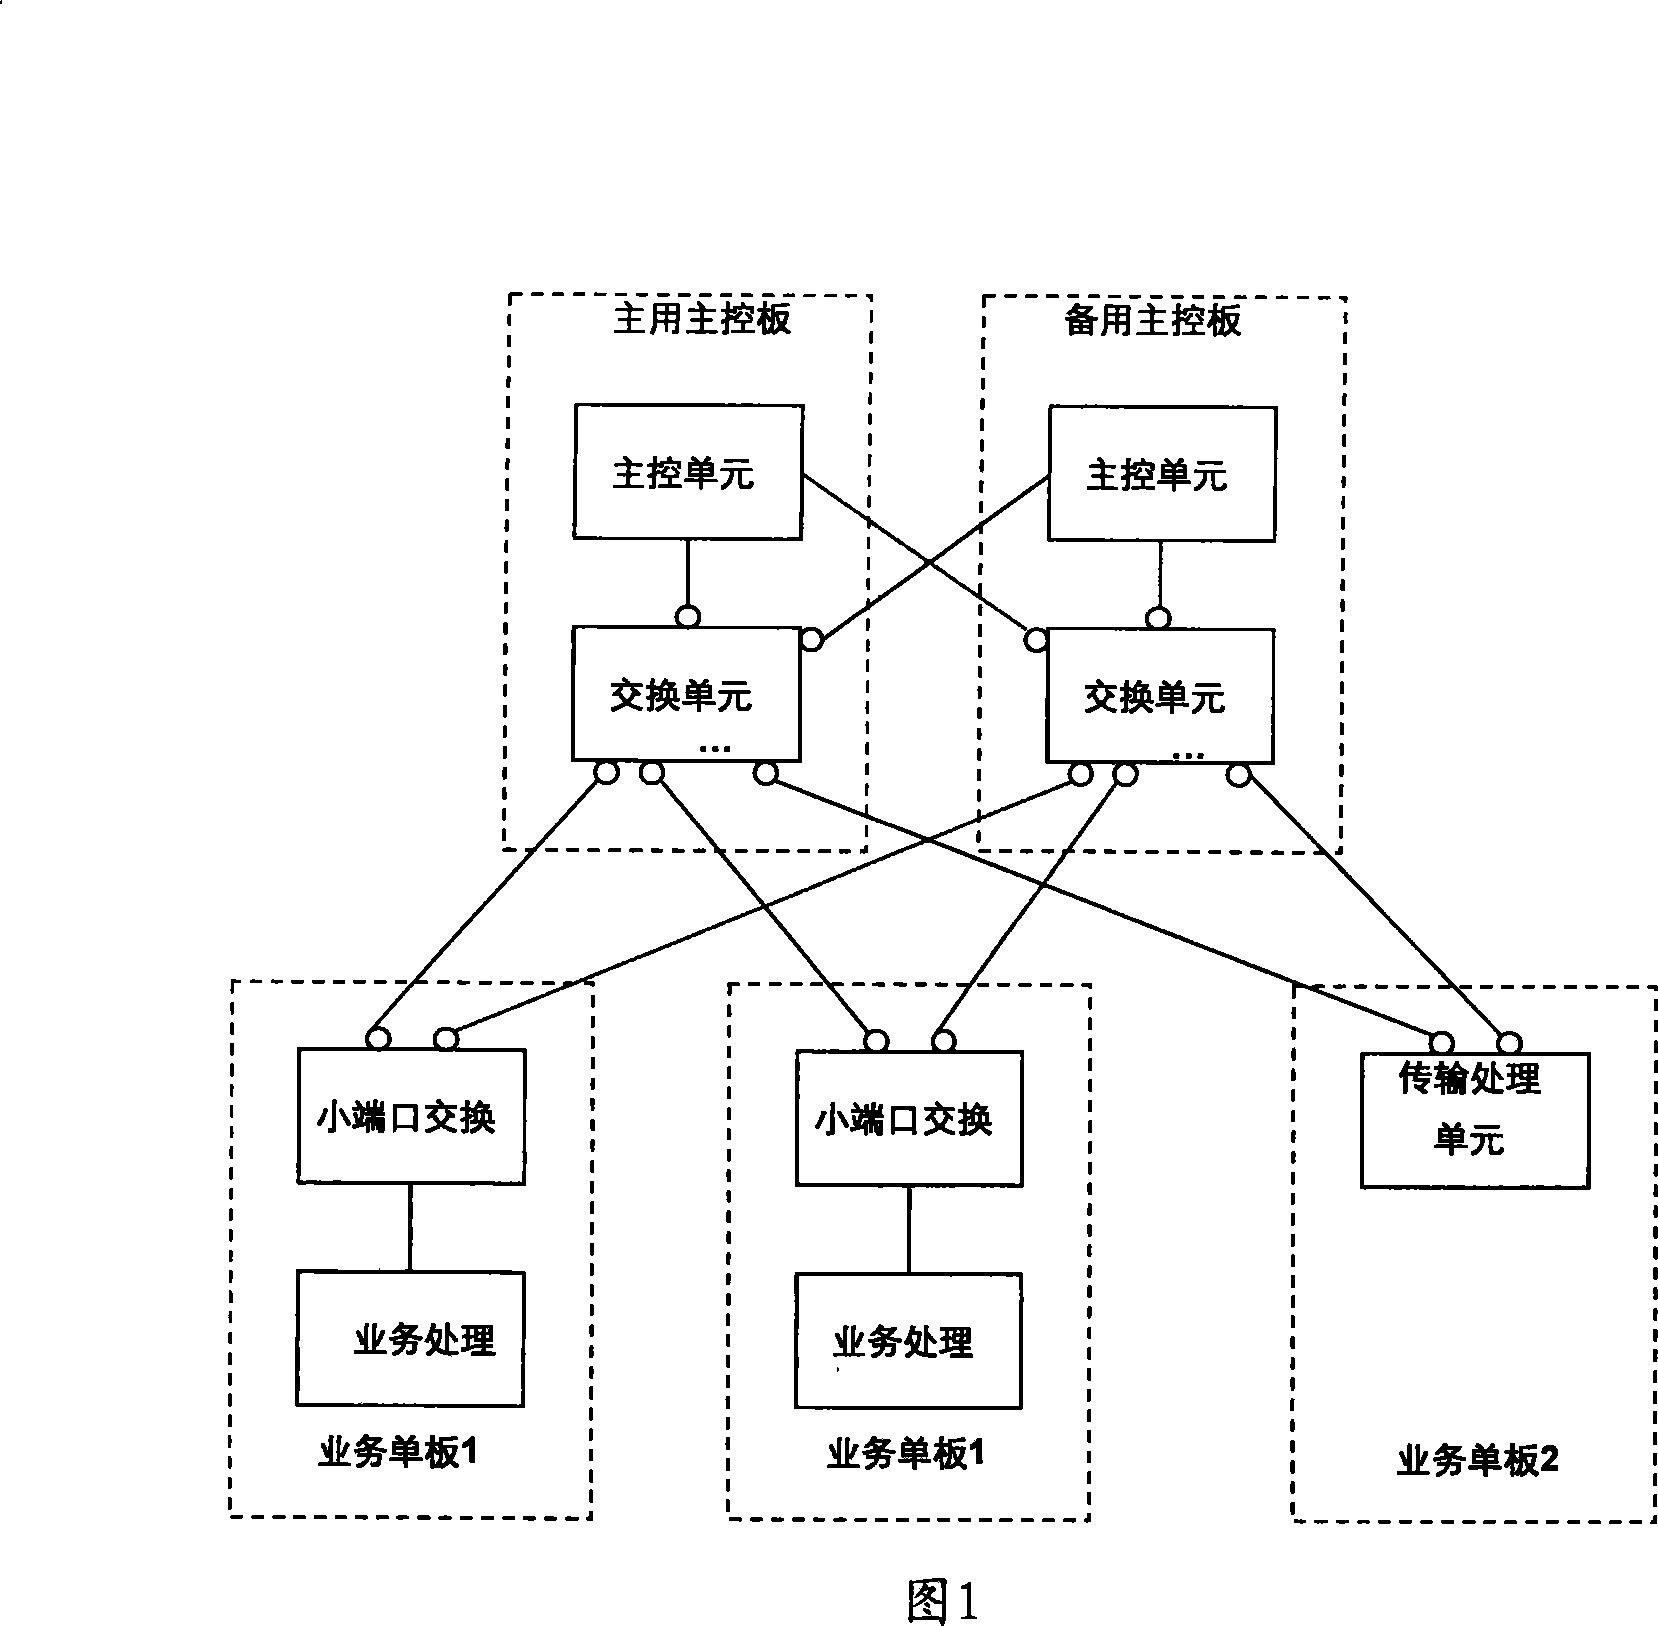 A method and device for realizing inter-board interconnection